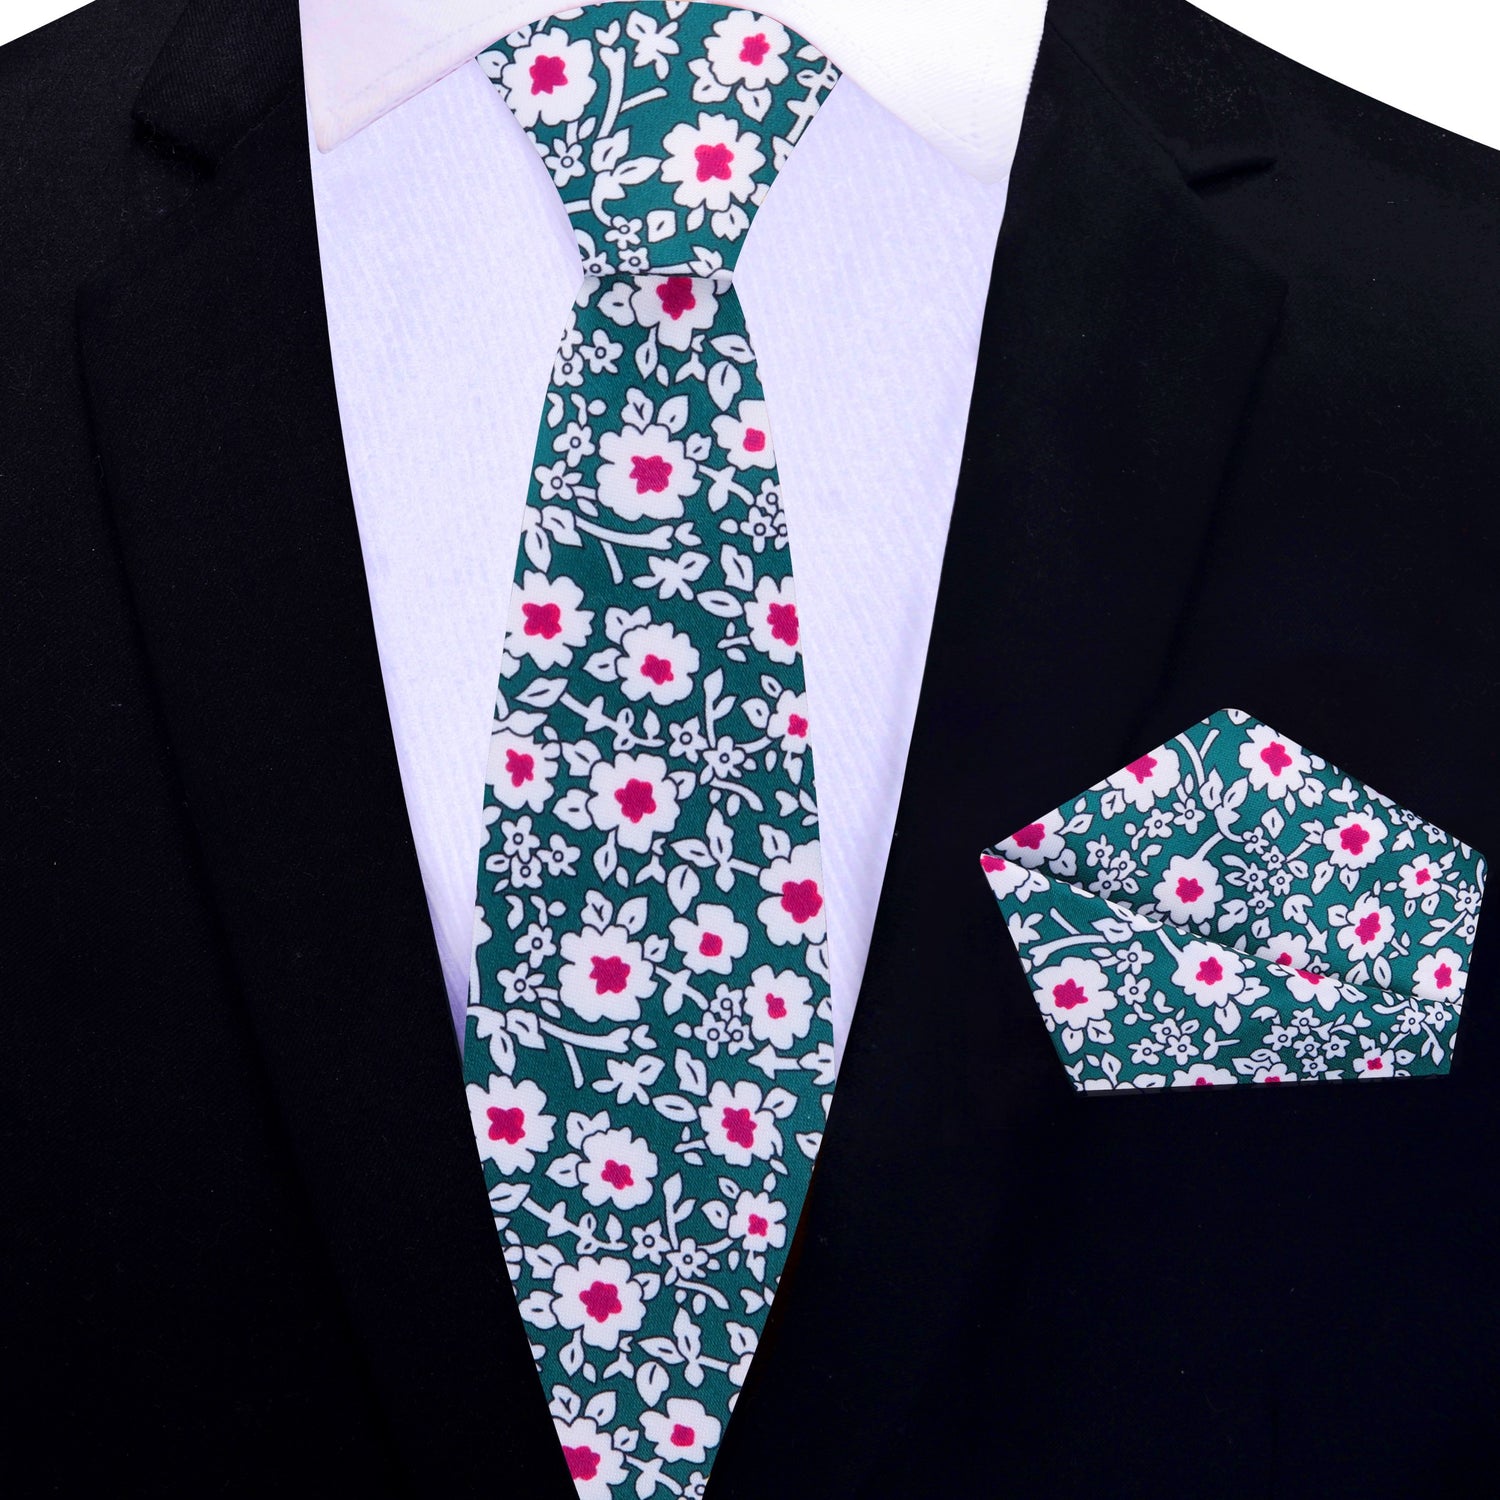 Thin Tie: Green, White, Pink Small Flowers Necktie and Matching Paisley Square